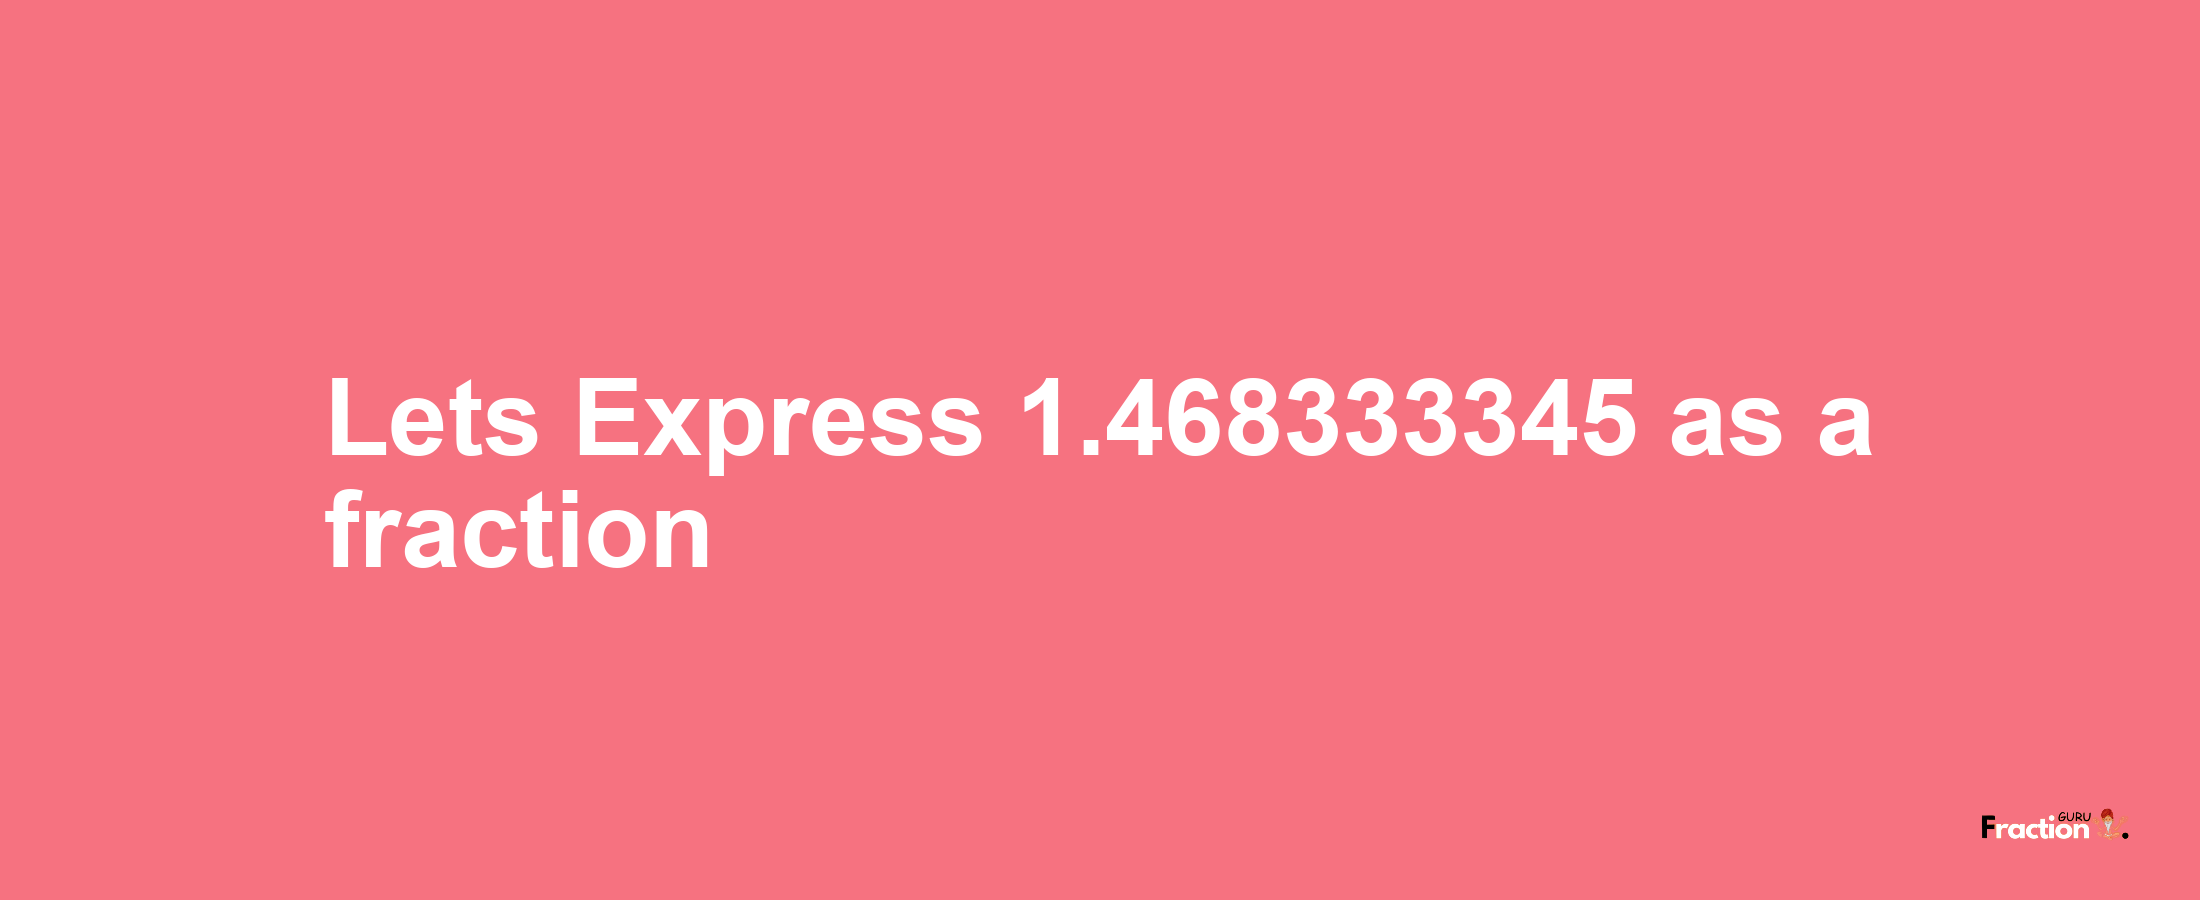 Lets Express 1.468333345 as afraction